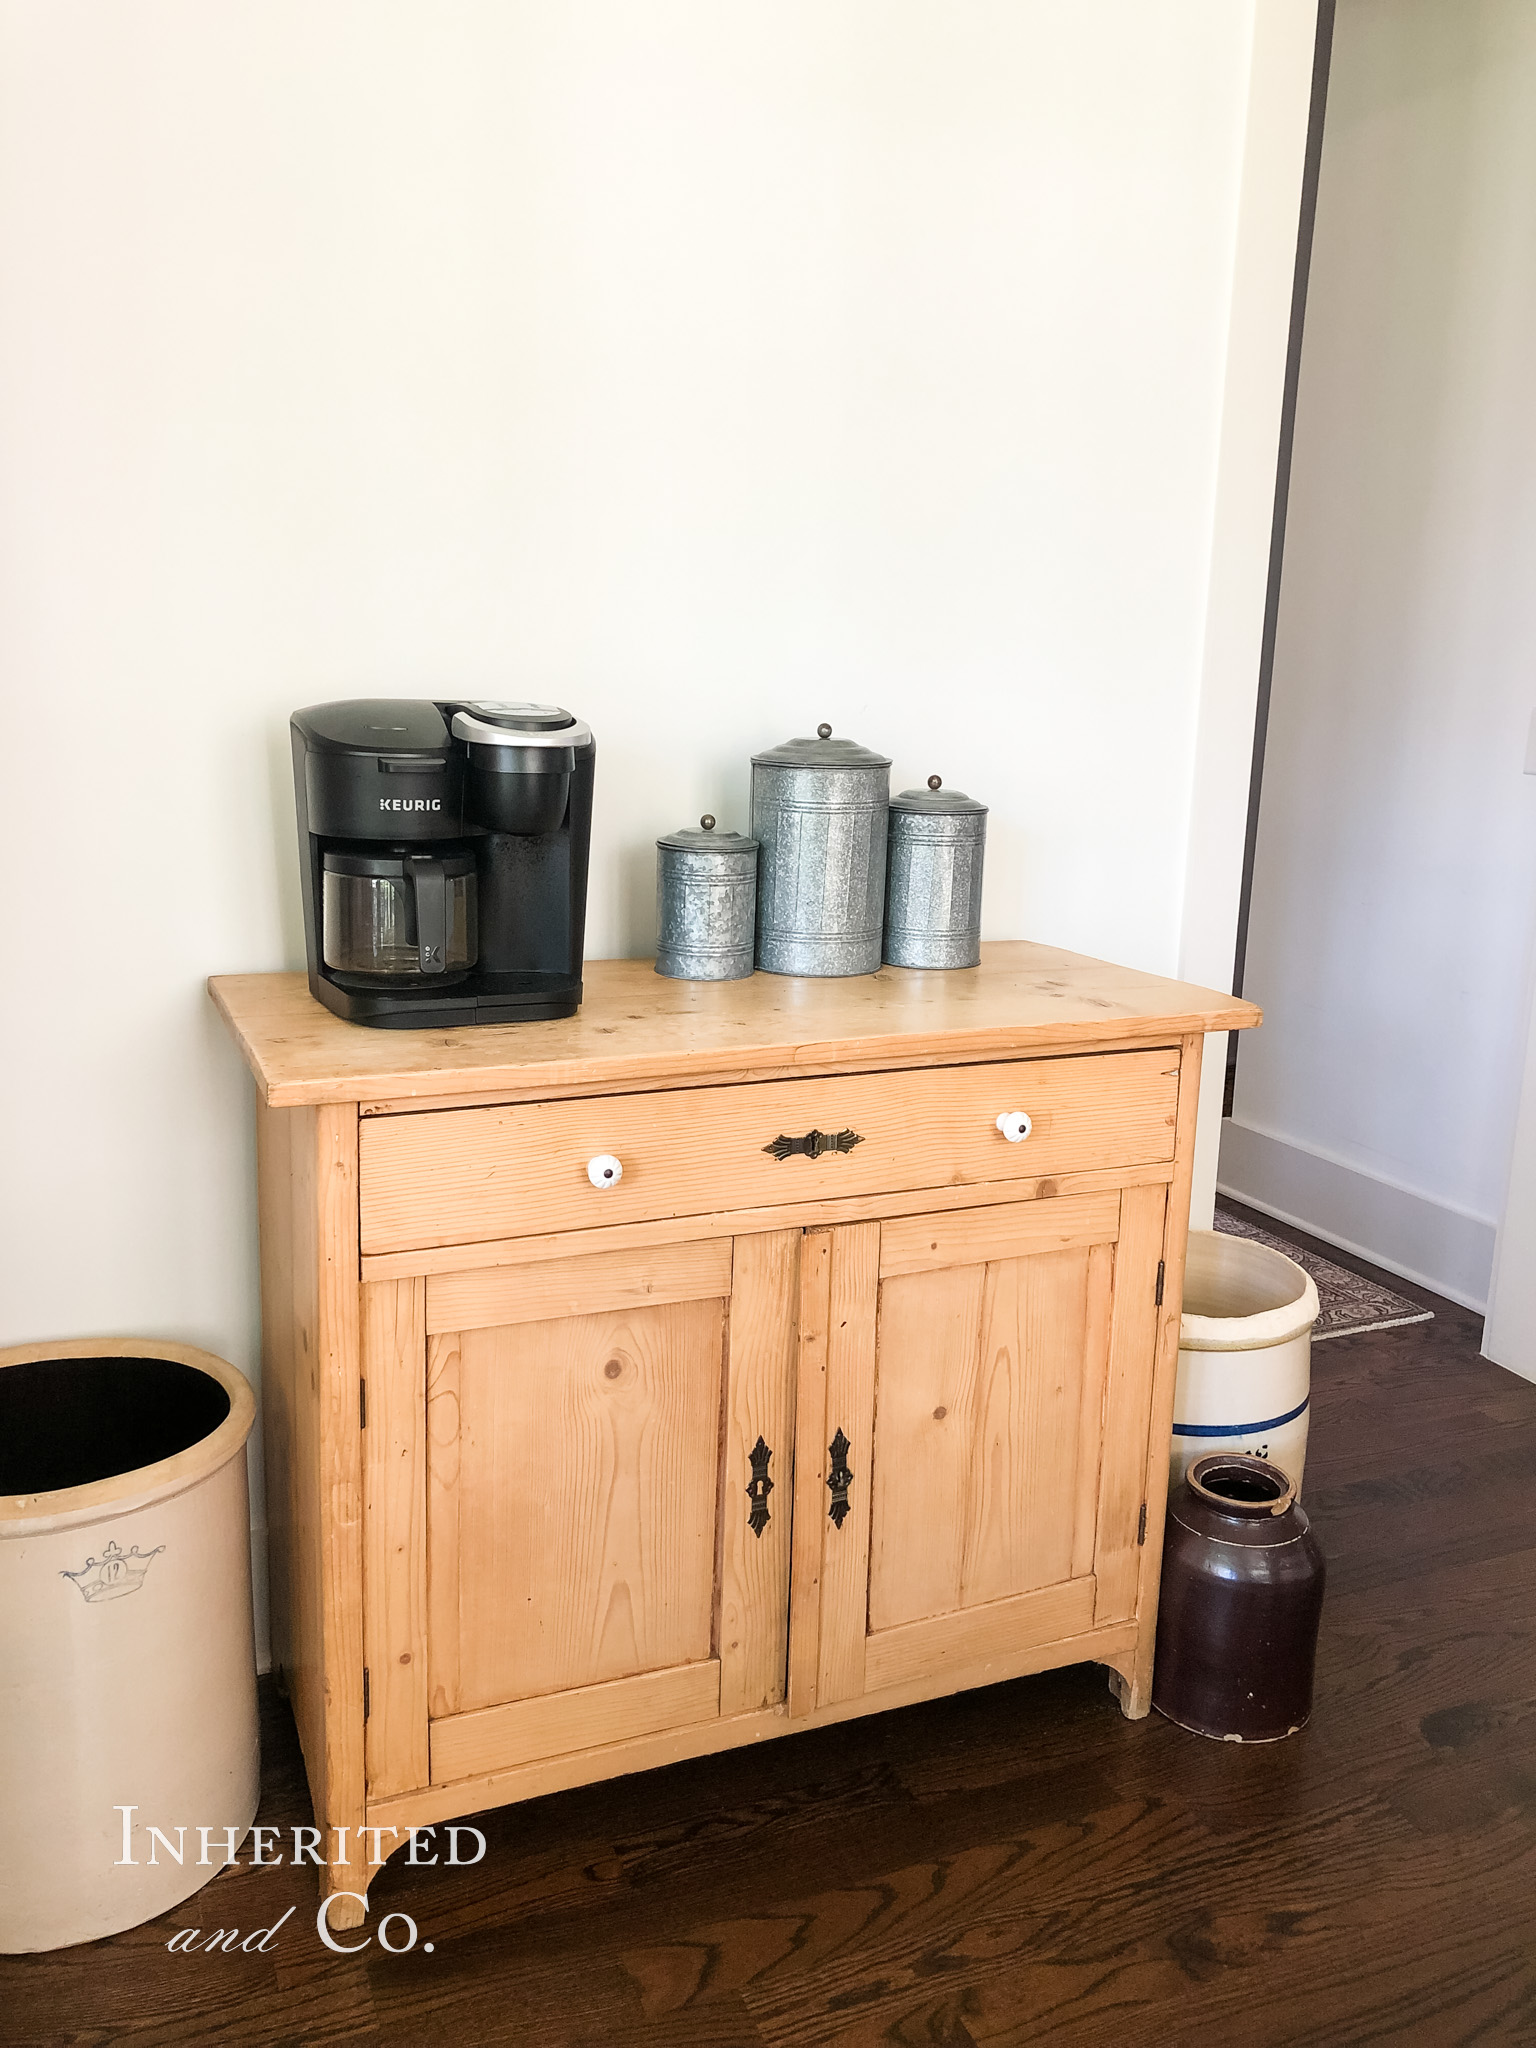 Home Coffee Bar Before Photo of Antique English Pine Cabinet in Breakfast Nook